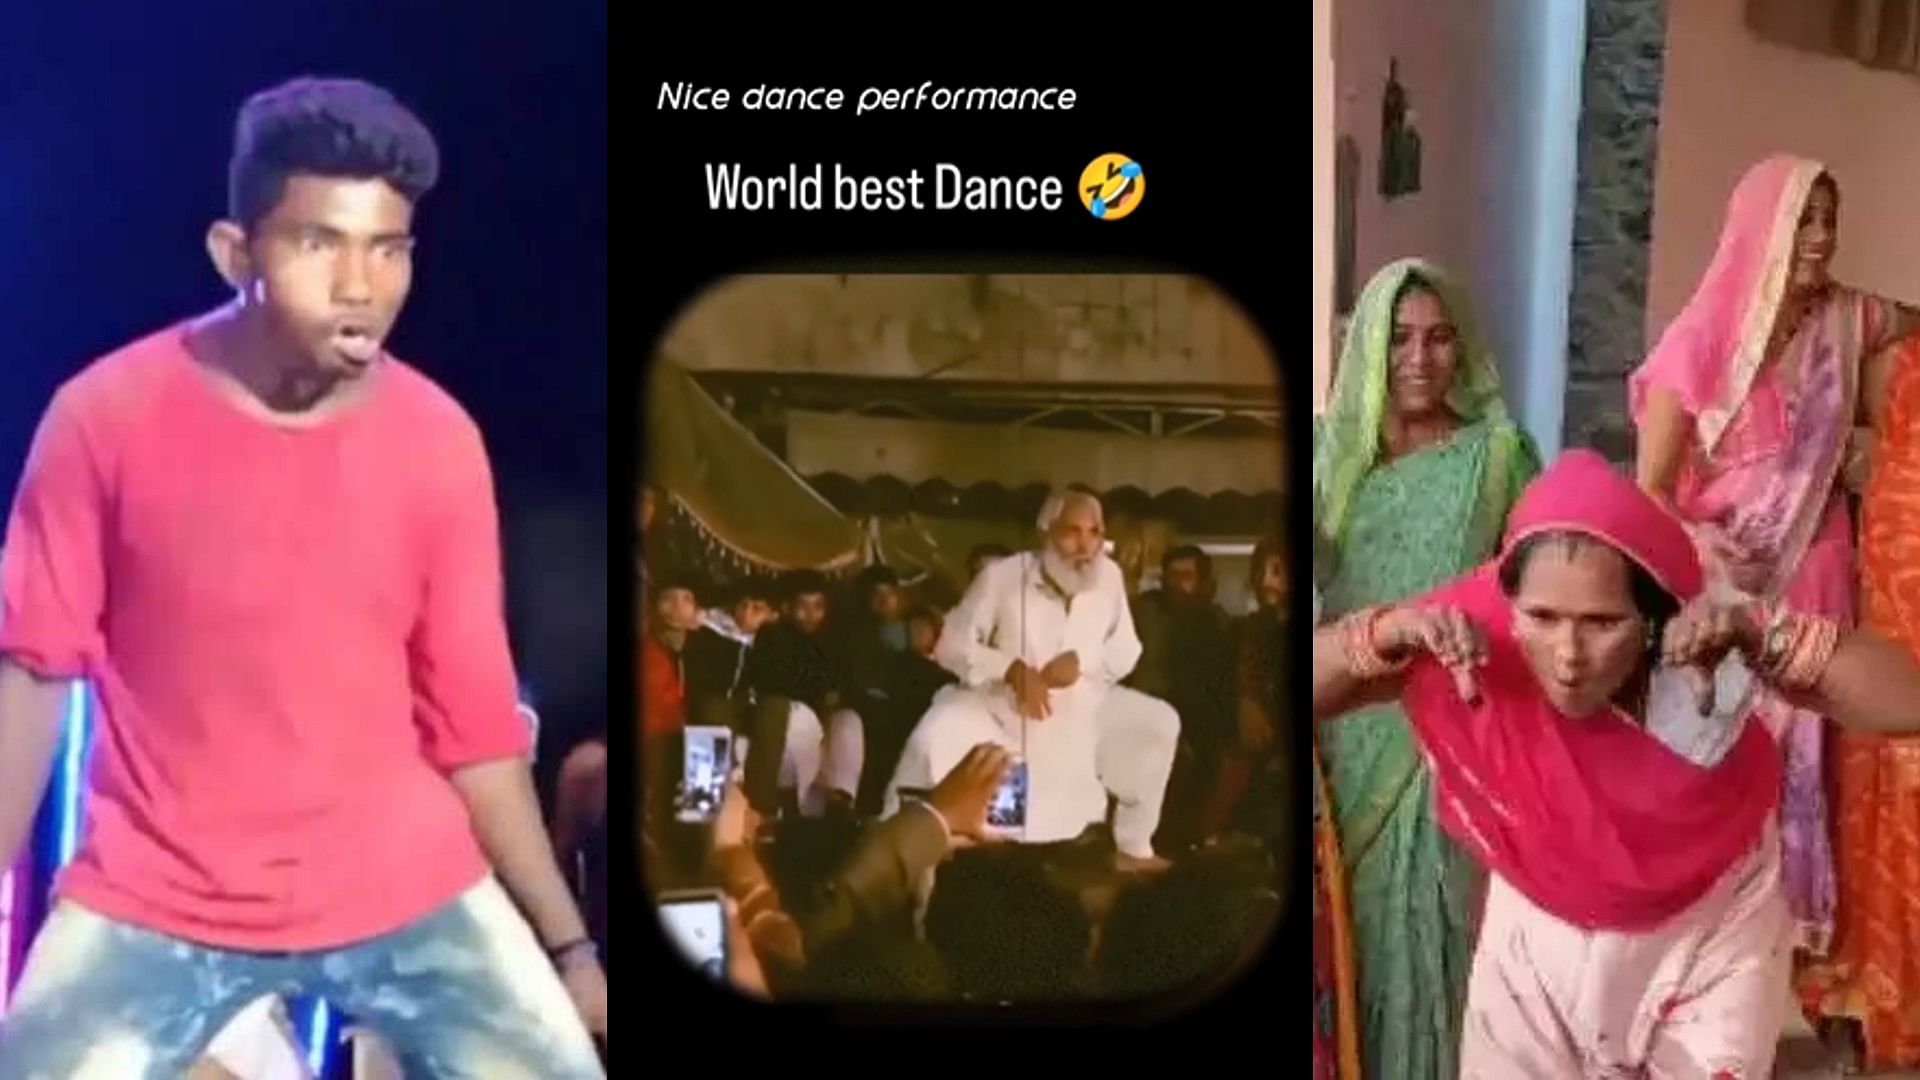 Most Funny Dance Videos: Murga dance videos are going viral on social media